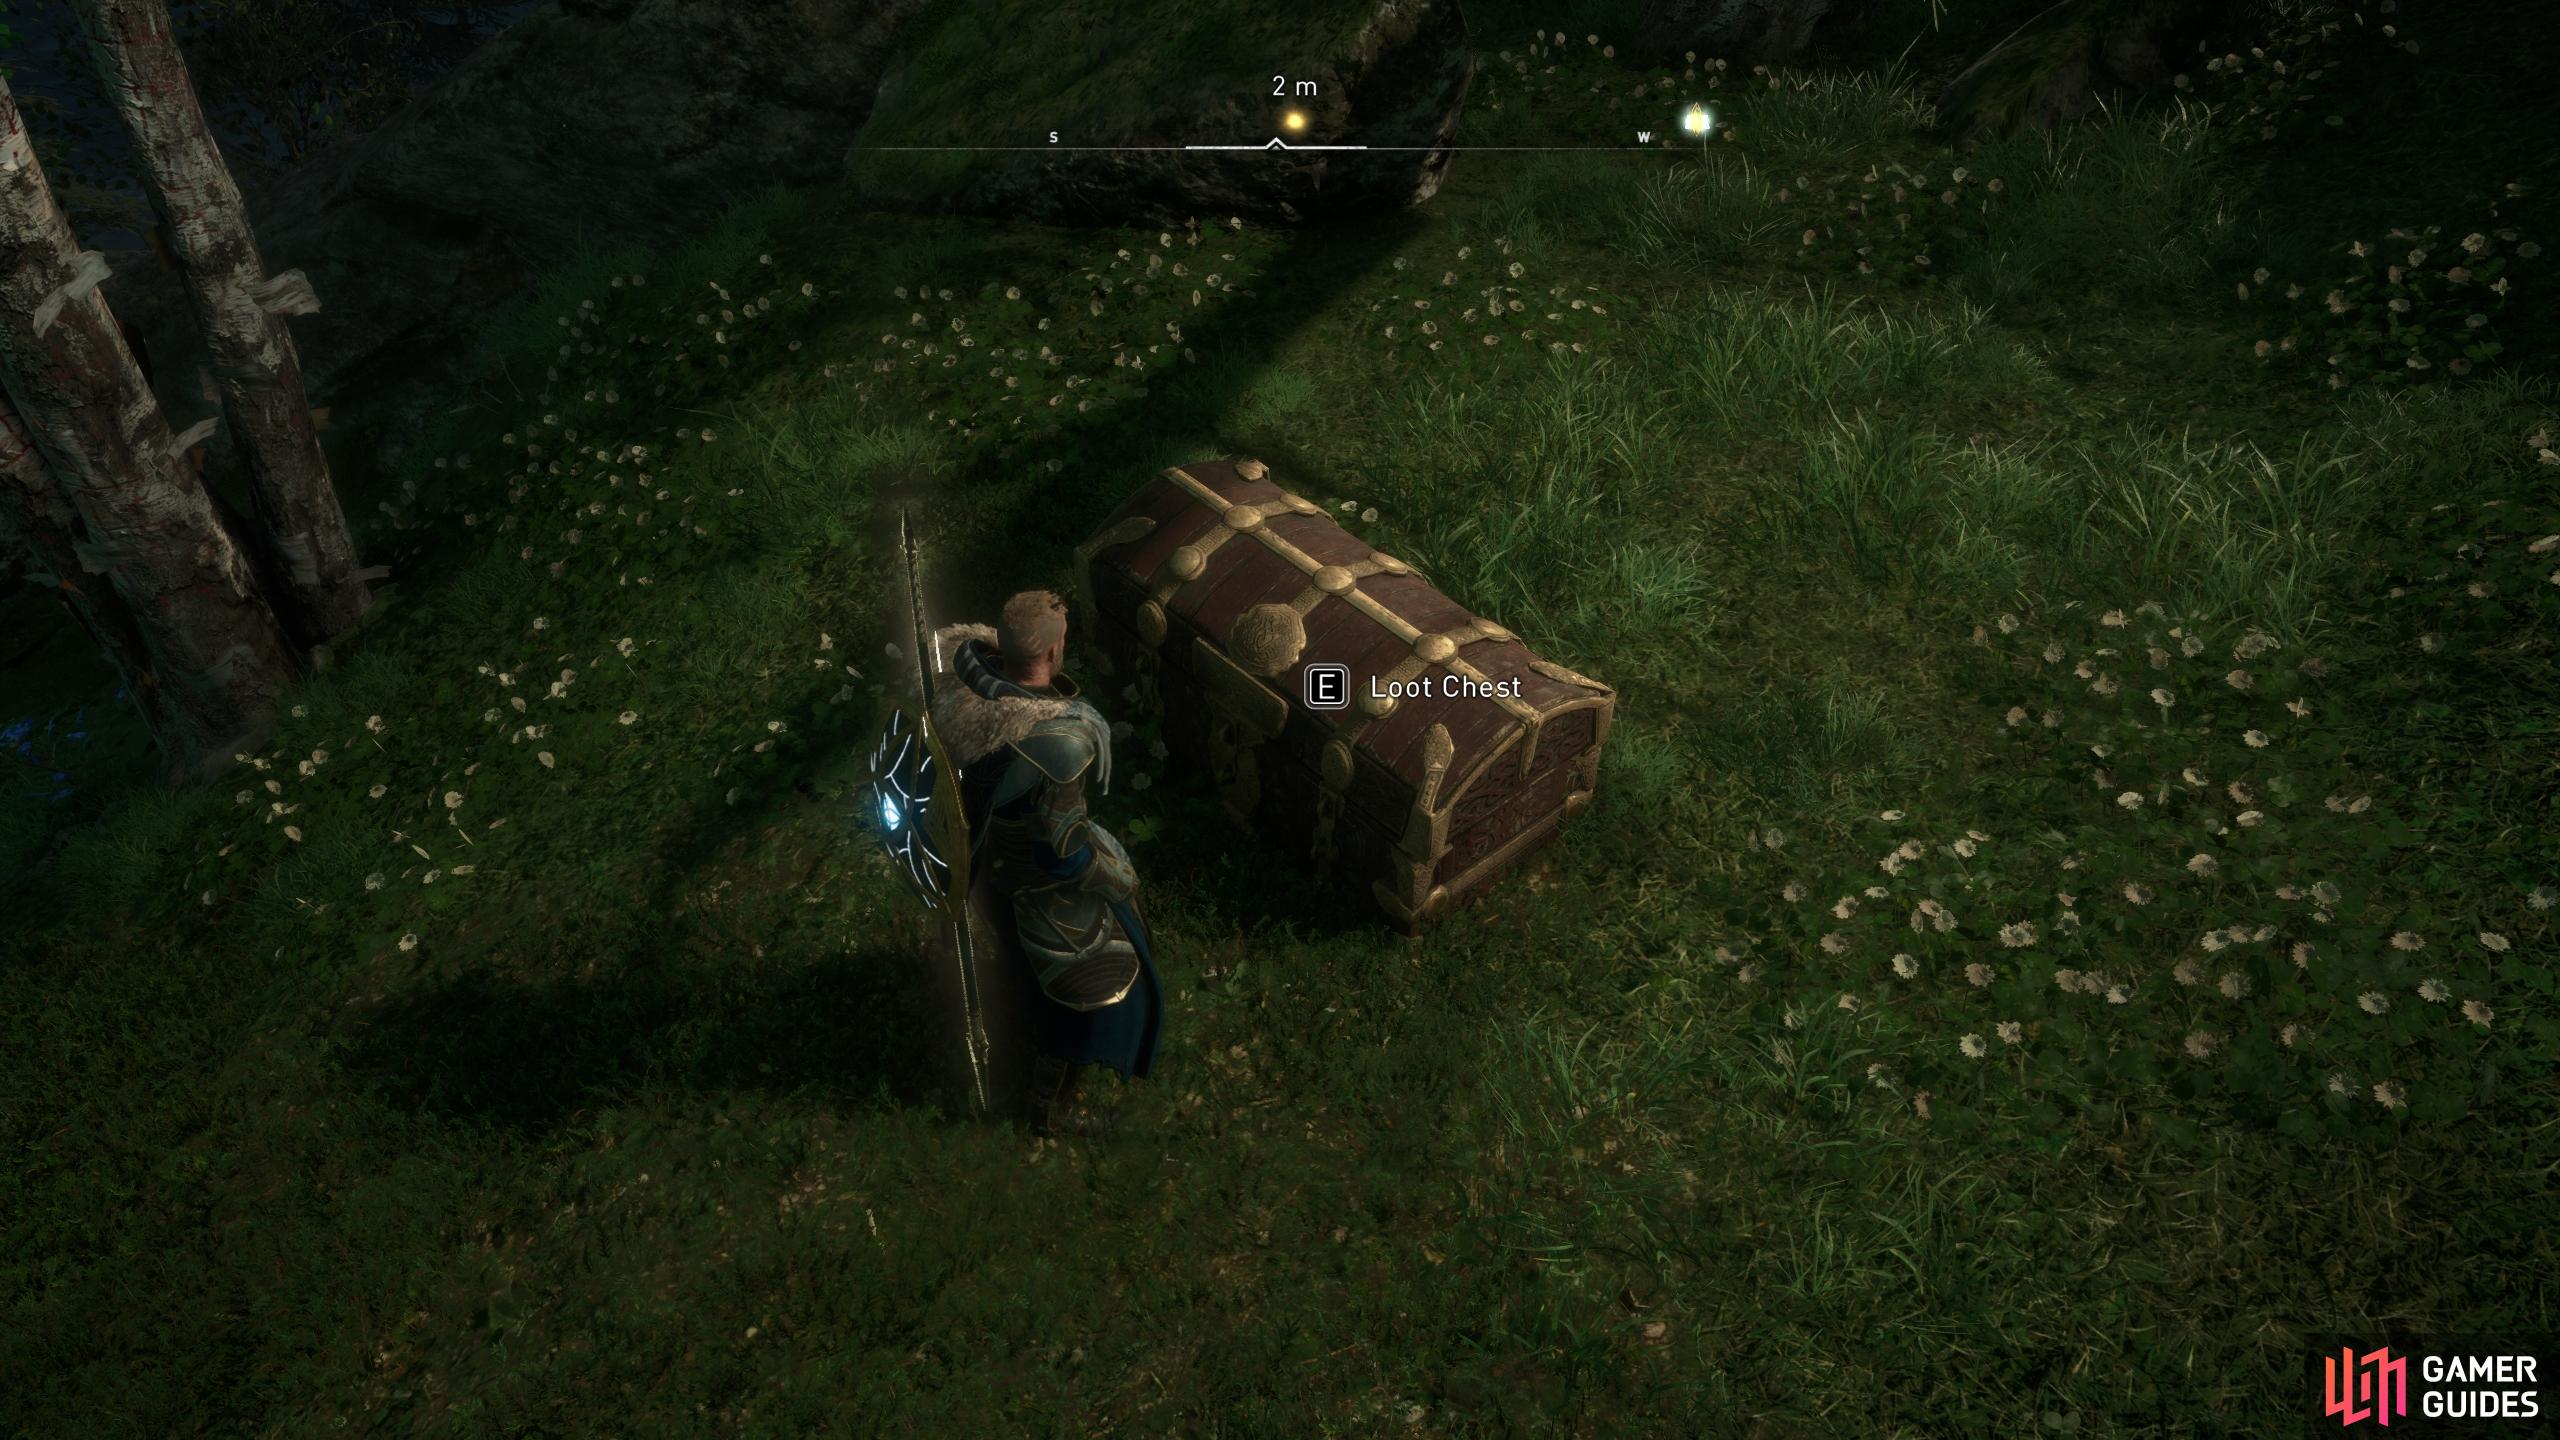 Loot the chest at the end of the path to acquire an Ymir's Tear Stone.